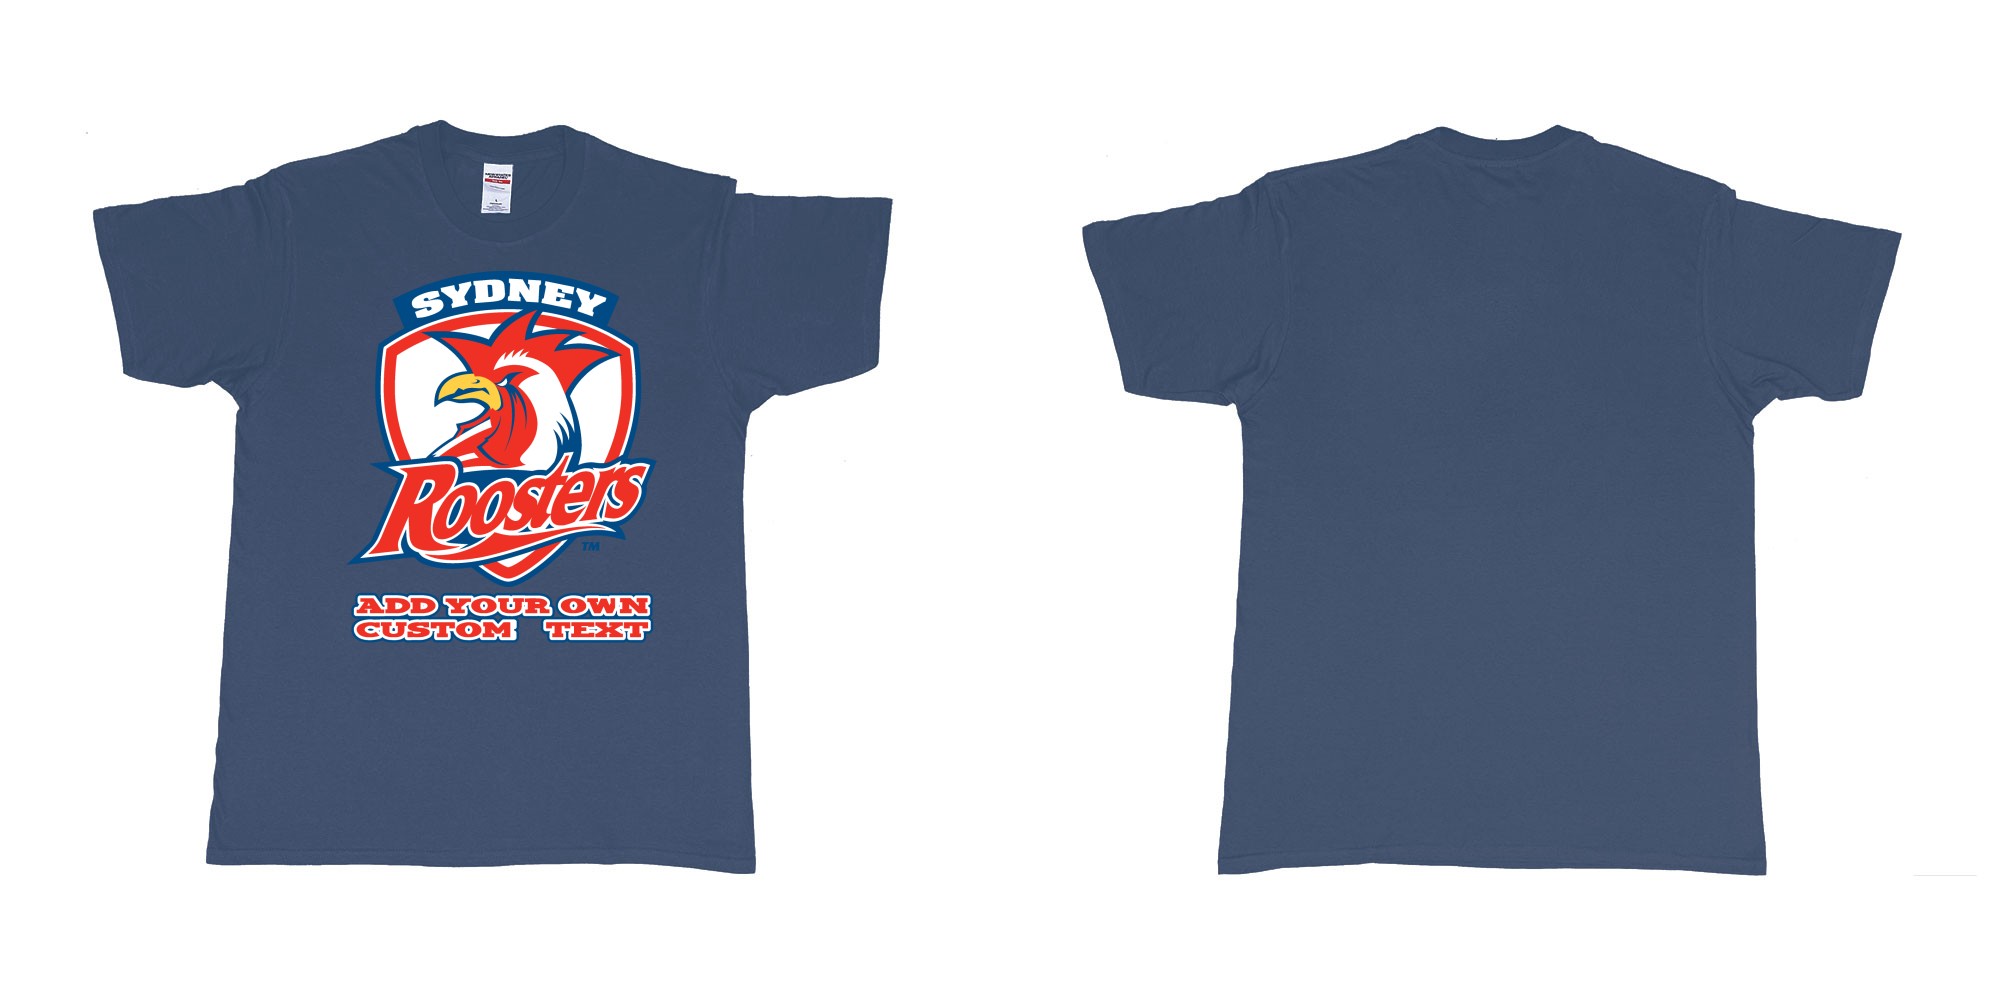 Custom tshirt design sydney roosters custom NRL design in fabric color navy choice your own text made in Bali by The Pirate Way